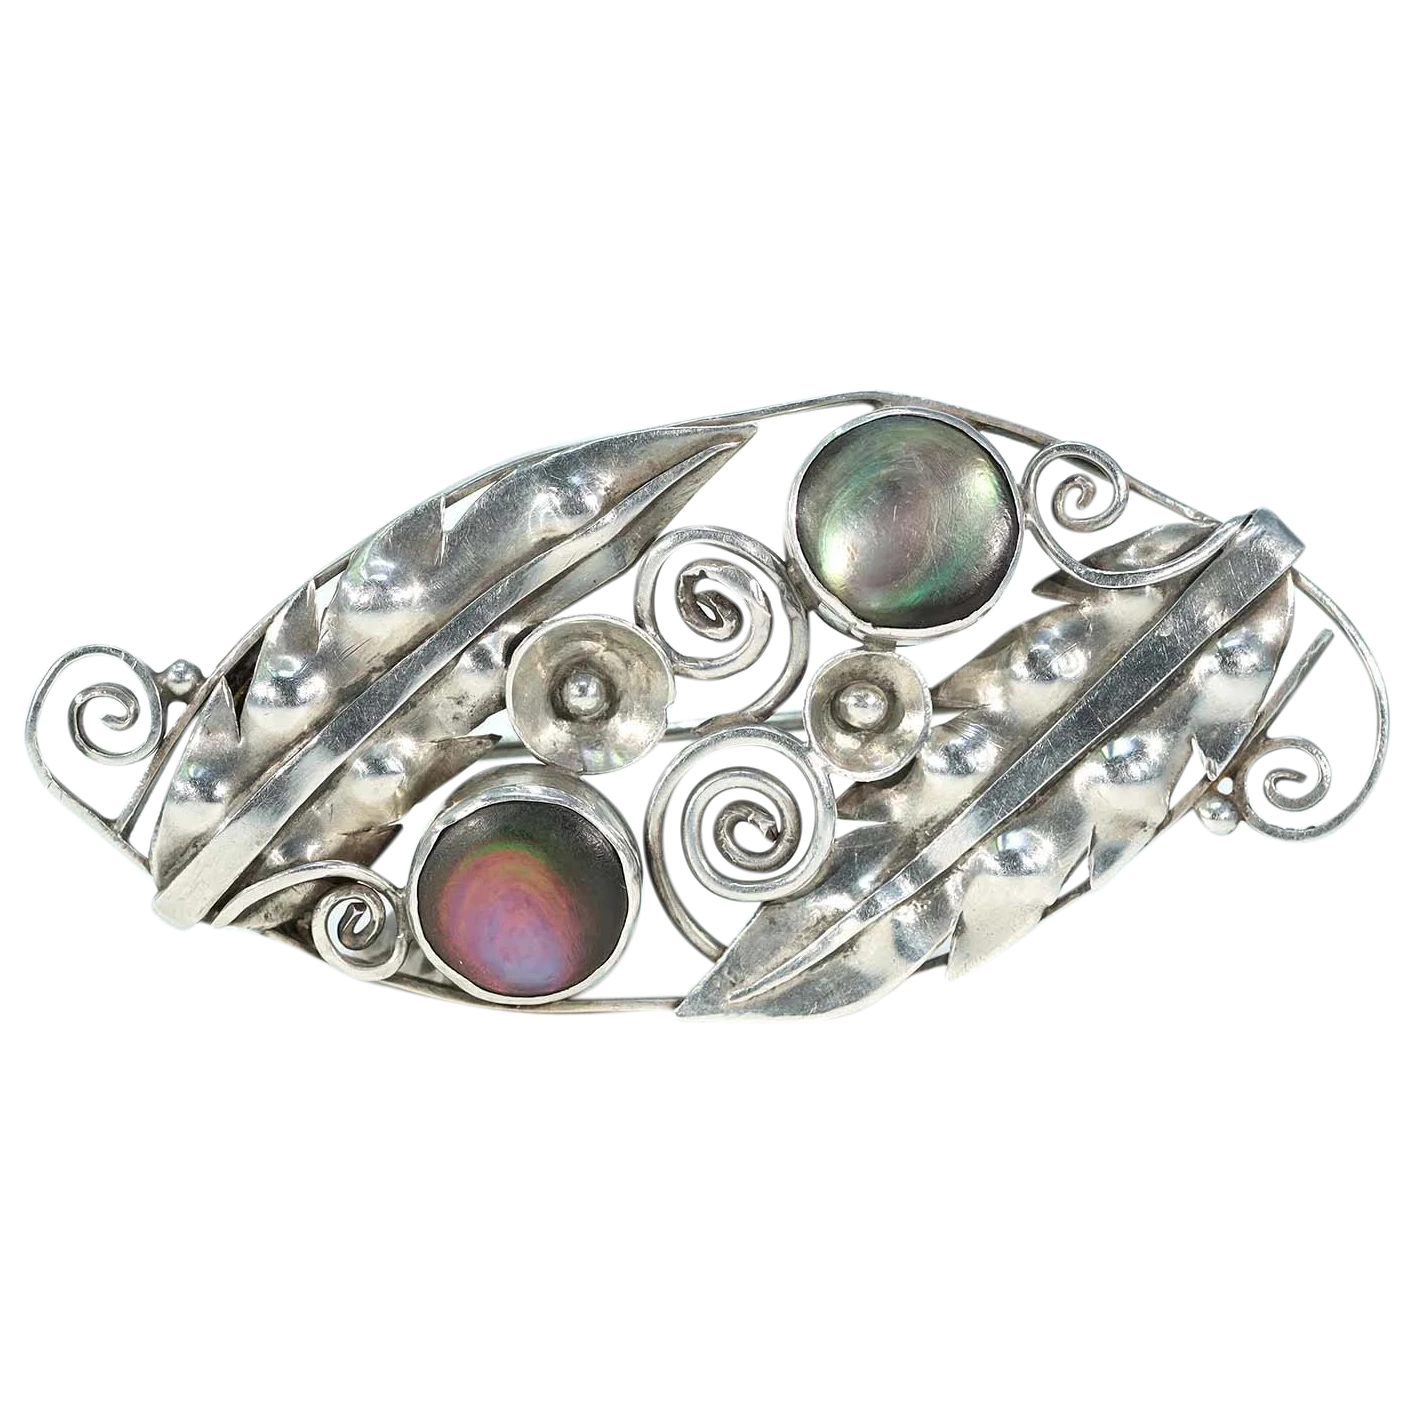 Vintage 1960s Silver Mother of Pearl Brooch